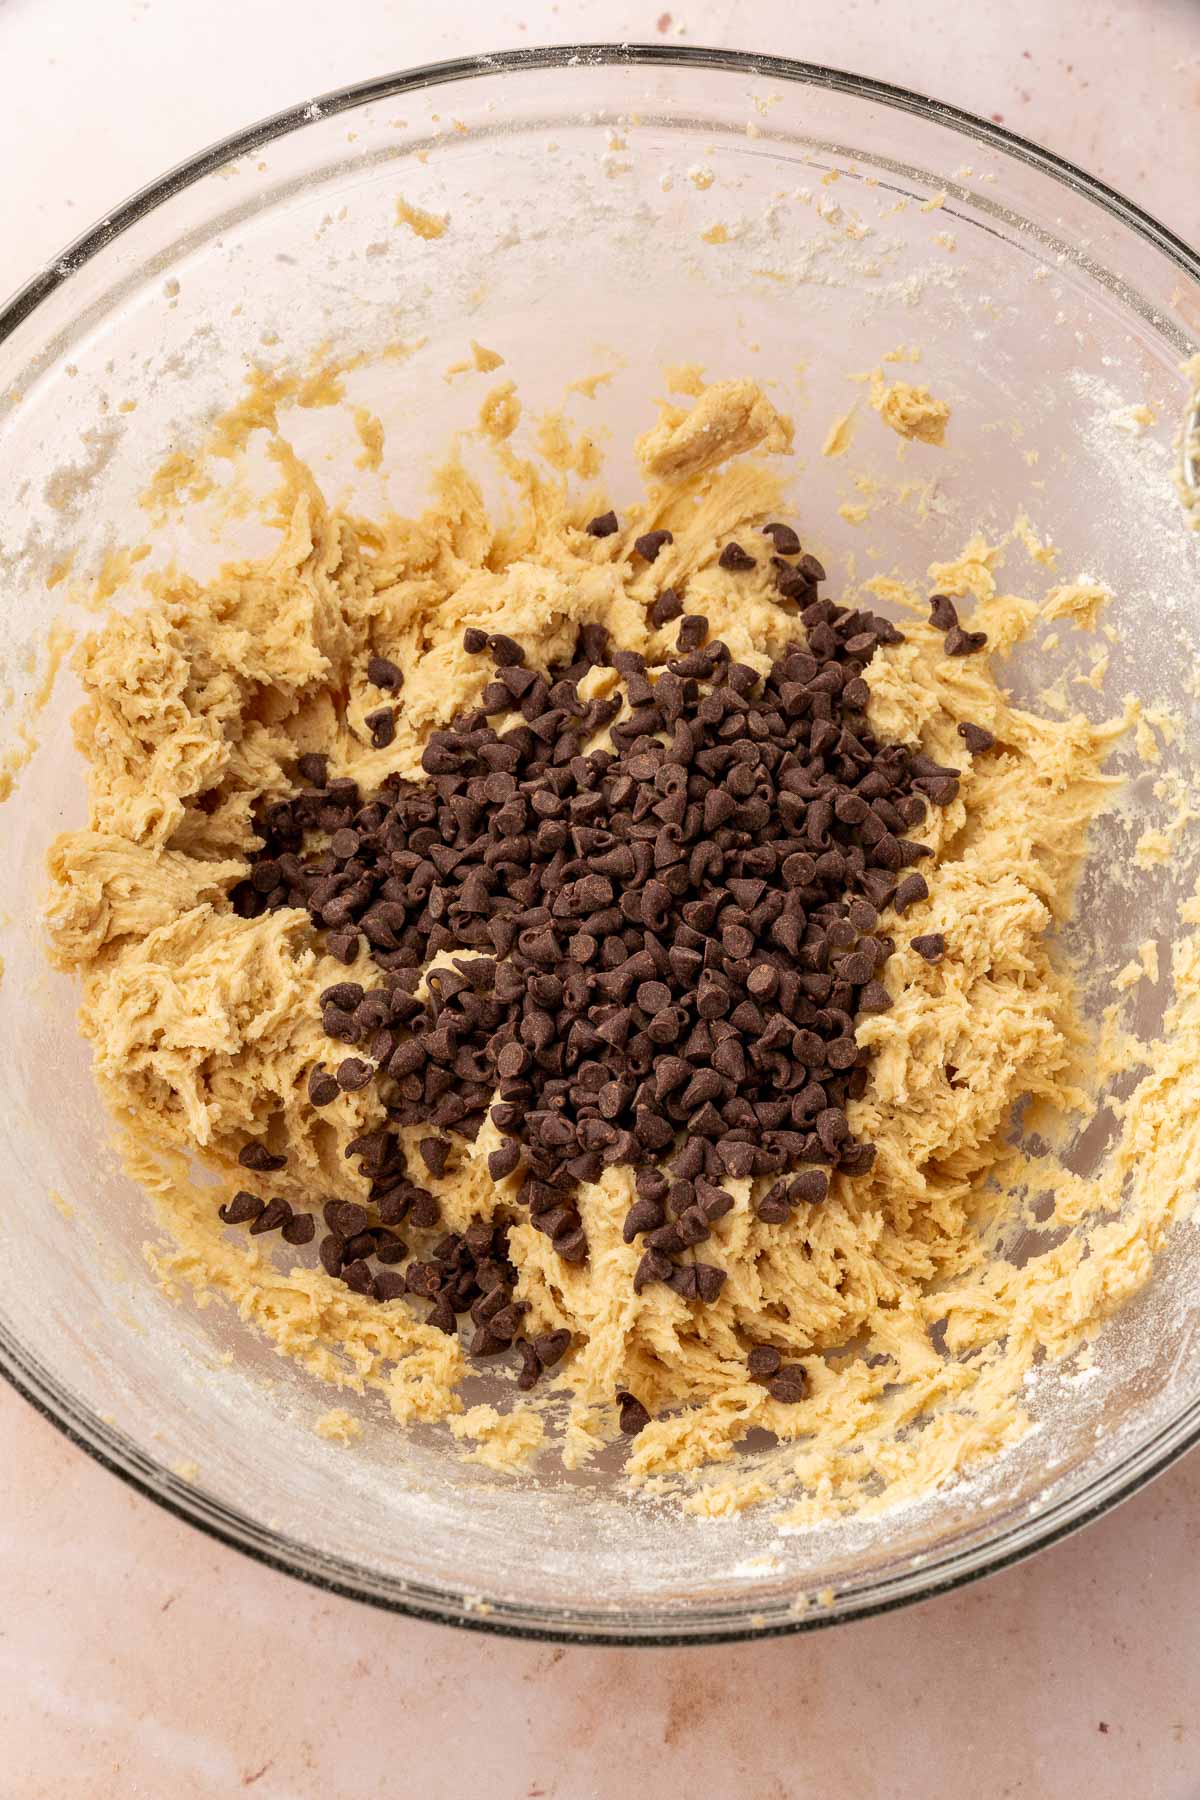 A glass mixing bowl of gluten-free cookie dough topped with a pile of mini chocolate chips before mixing together.